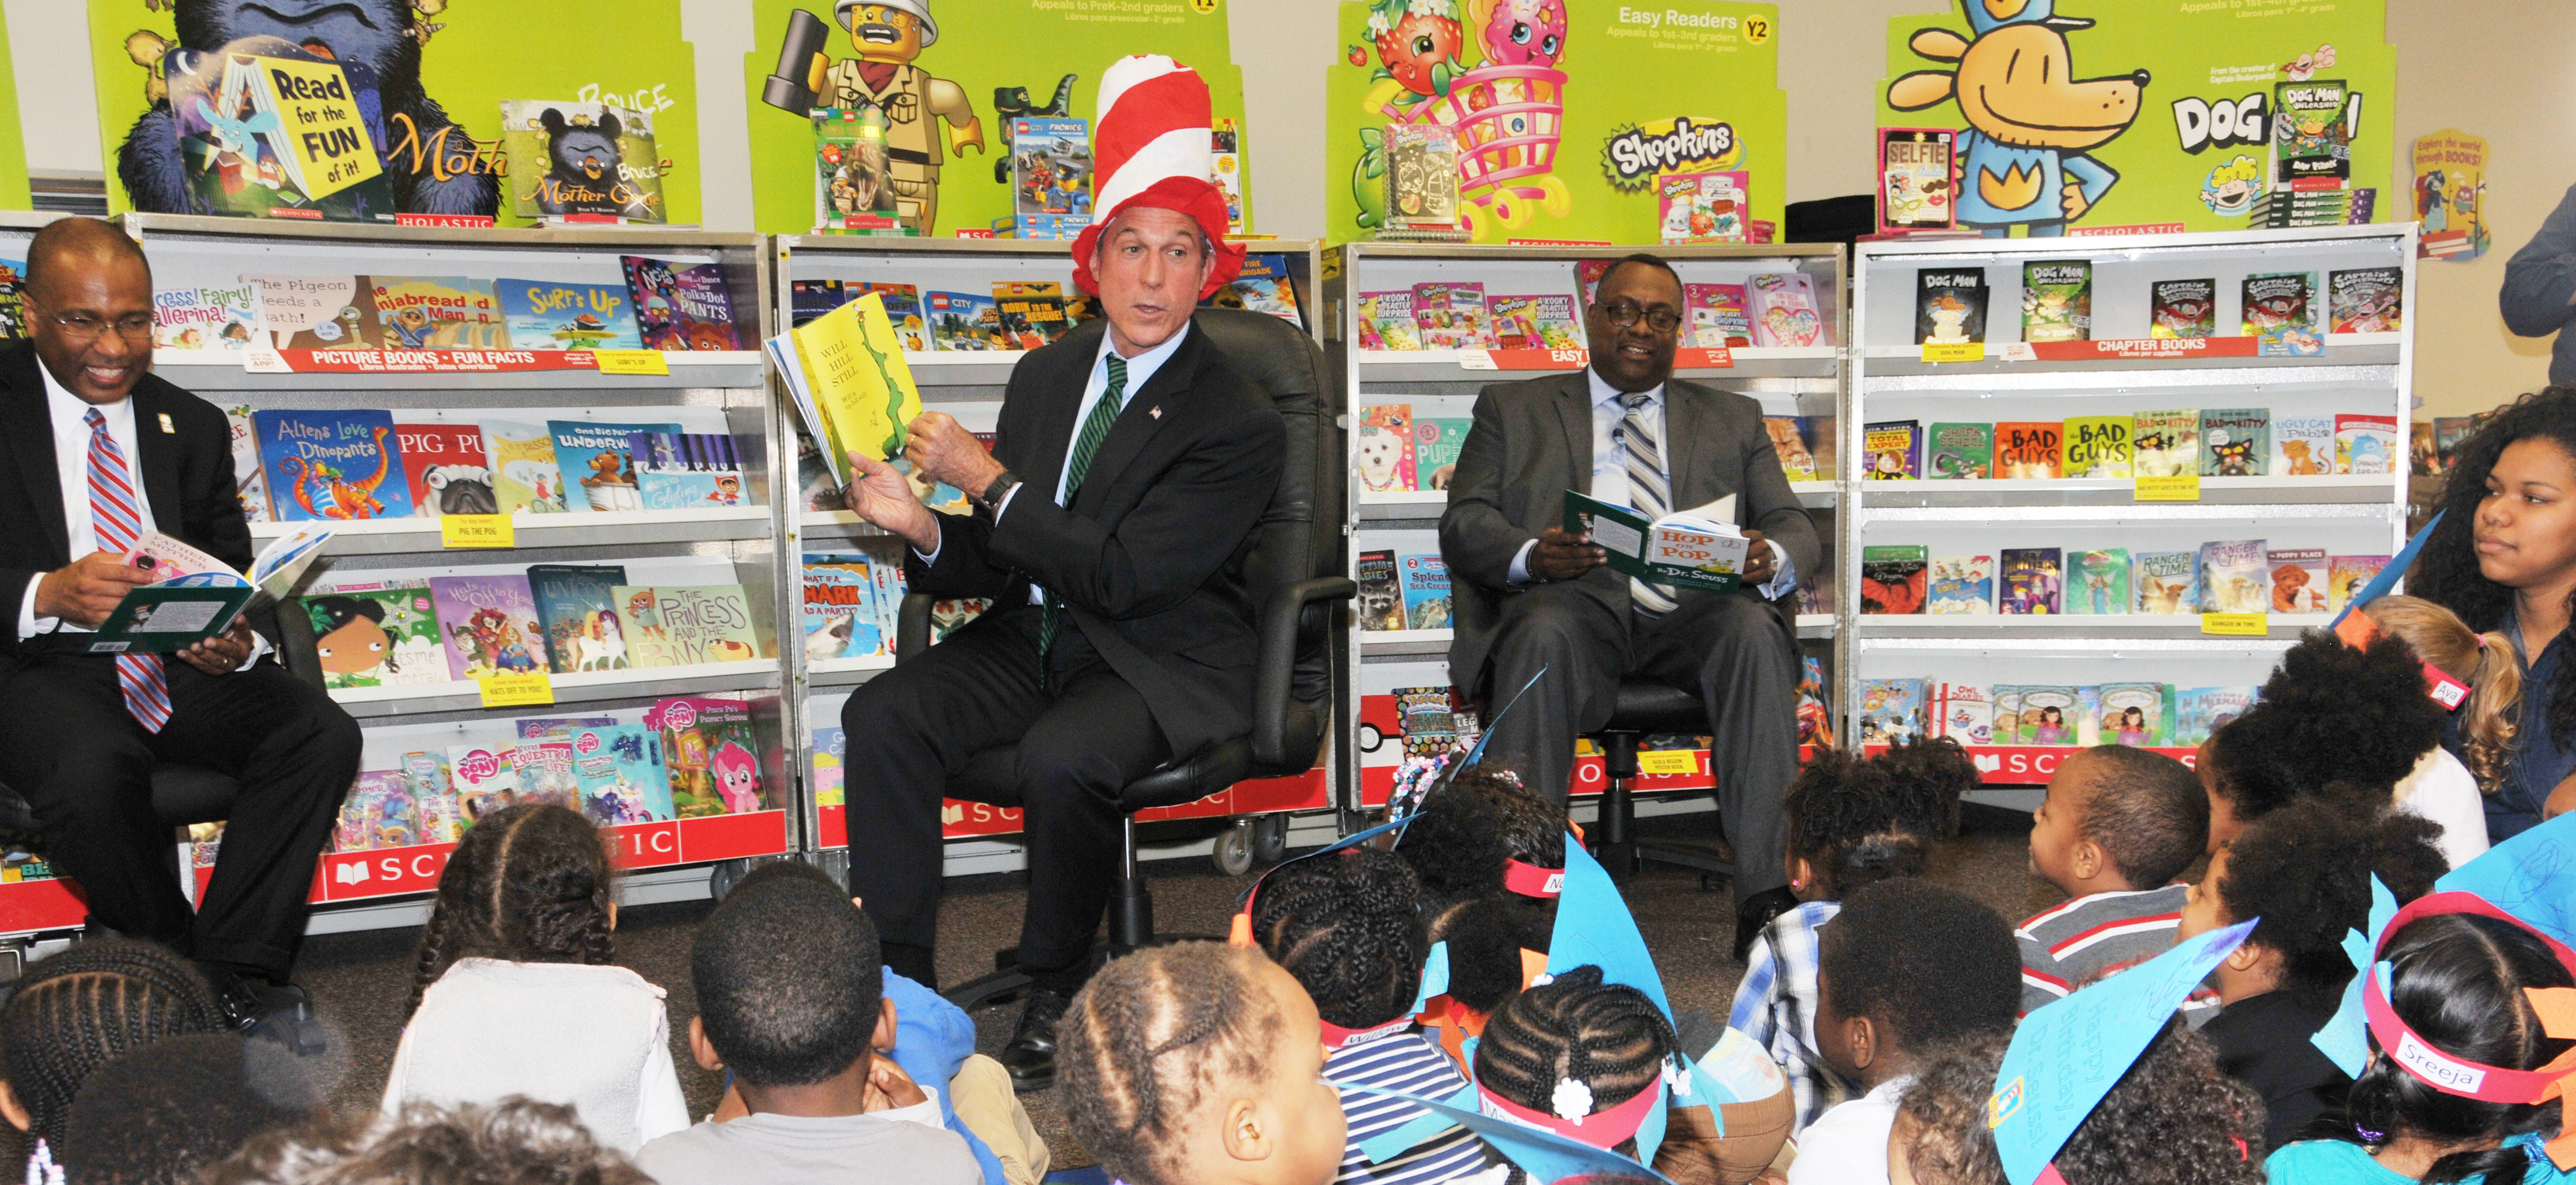 Gov. John Carney reads to the children, while Tyrone James of the United Way of Del. also reads along.